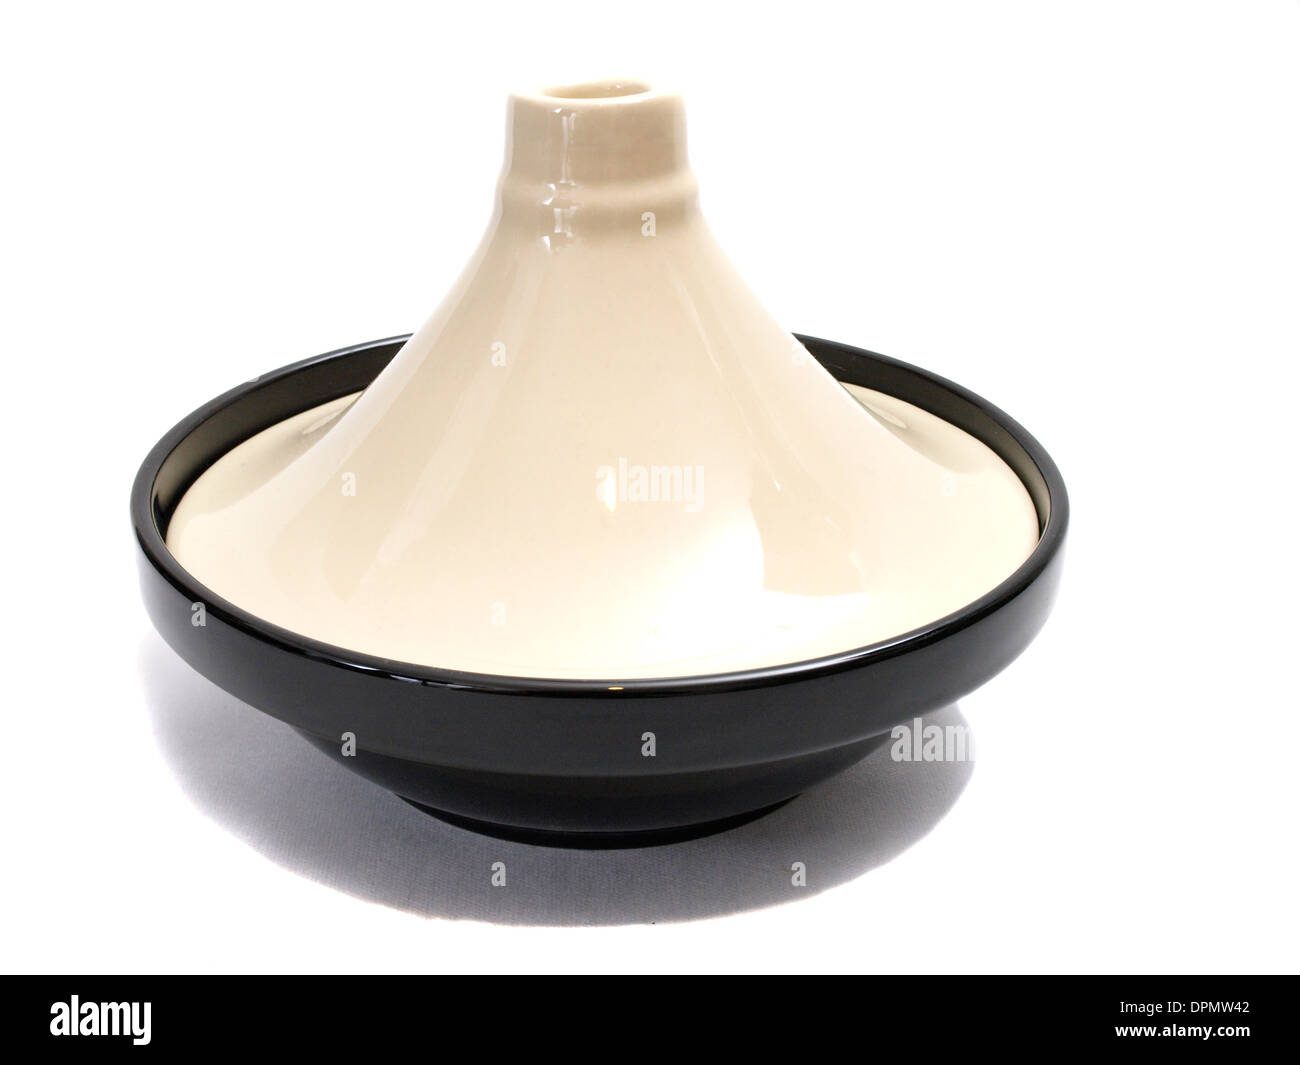 Moroccan Tagine cooking pot on a white background Stock Photo